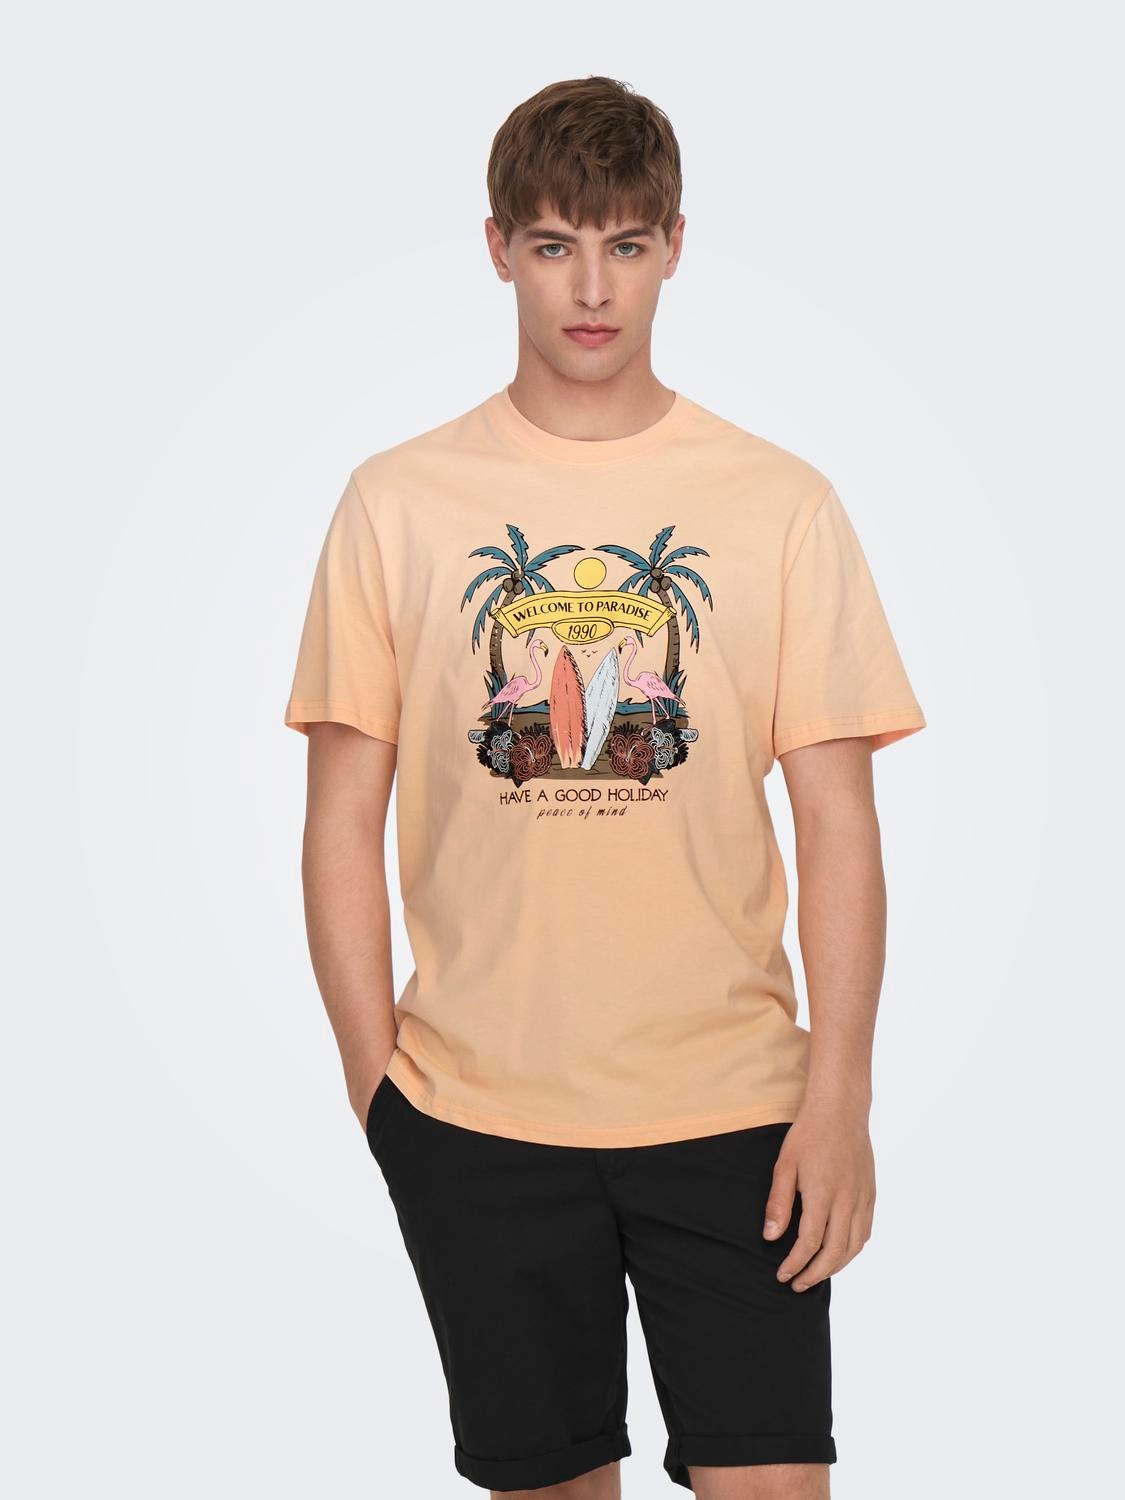 ONLY & SONS O-neck t-shirt with print -Peach Nectar - 22026084